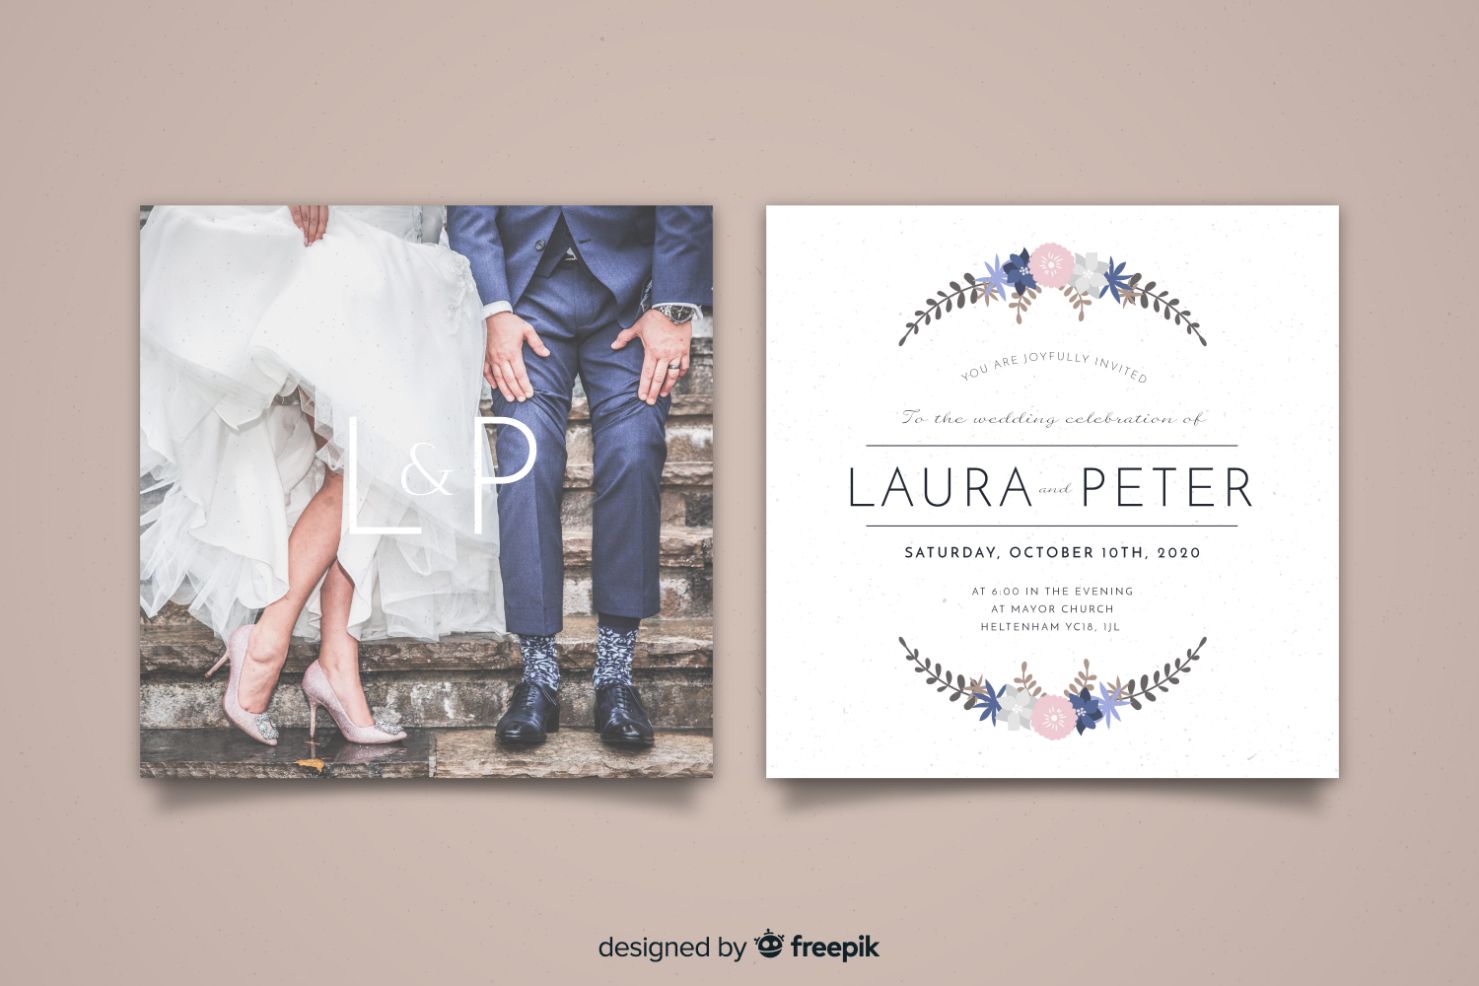 3.-Wedding-invitation-writing-–-unique-design-ideas-to-inspire-you_invitation-with-the-bride-and-groom-personal-picture